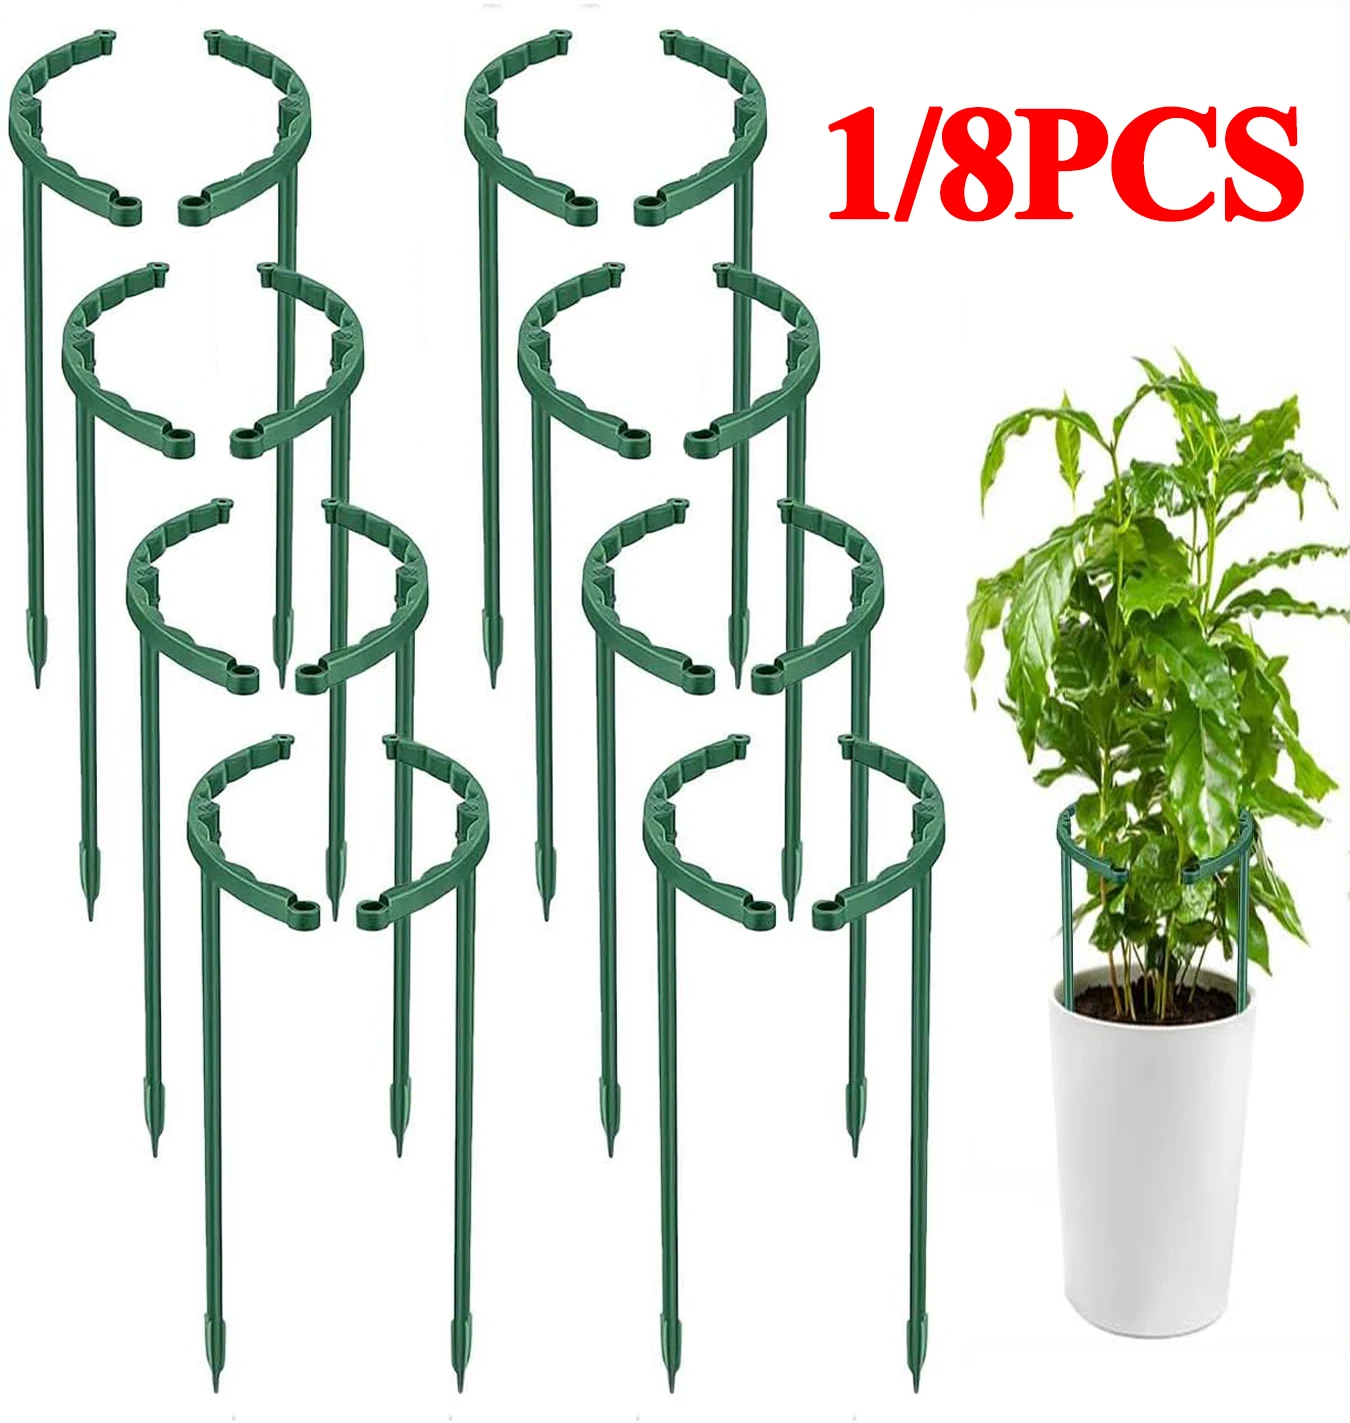 

1/8PCS Plant Support Plie Climb for Flowers Grow Greenhouses Plant Cage Fixing Rod Holder Indoor Balcony Gardening Bonsai Tools